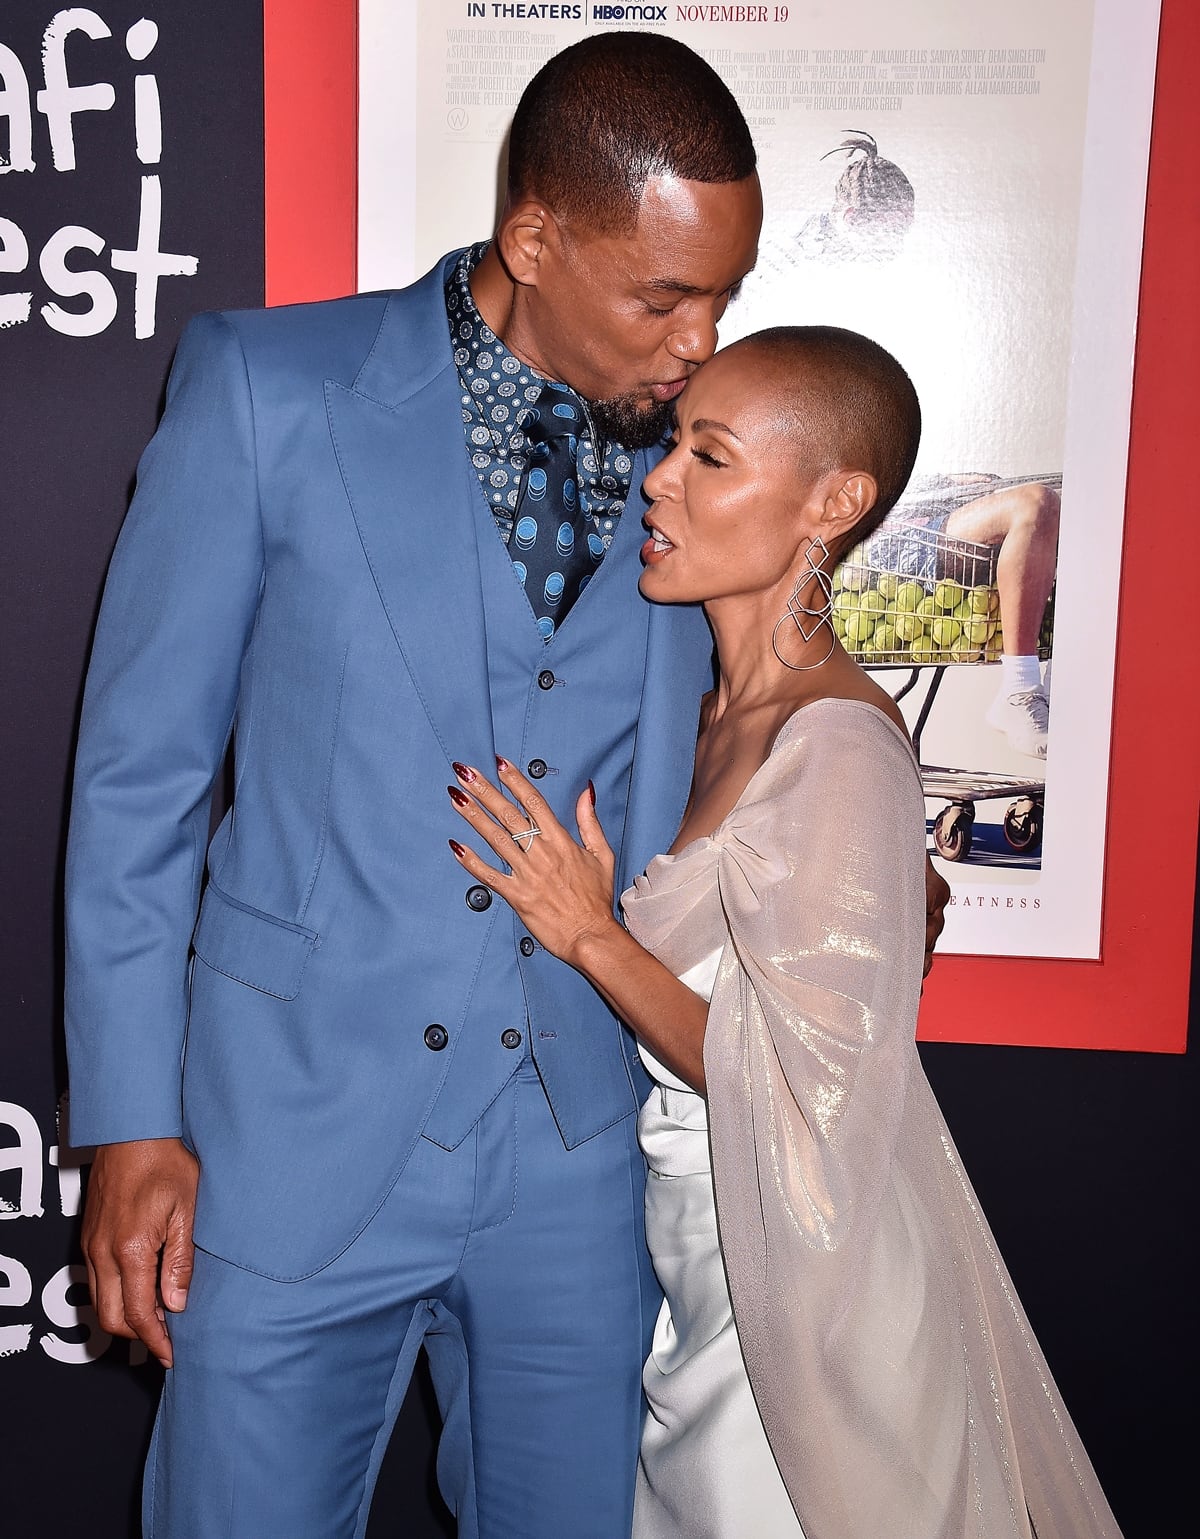 Jada Pinkett Smith and Will Smith attend the 2021 AFI Fest - Closing Night Premiere of Warner Bros. "King Richard"